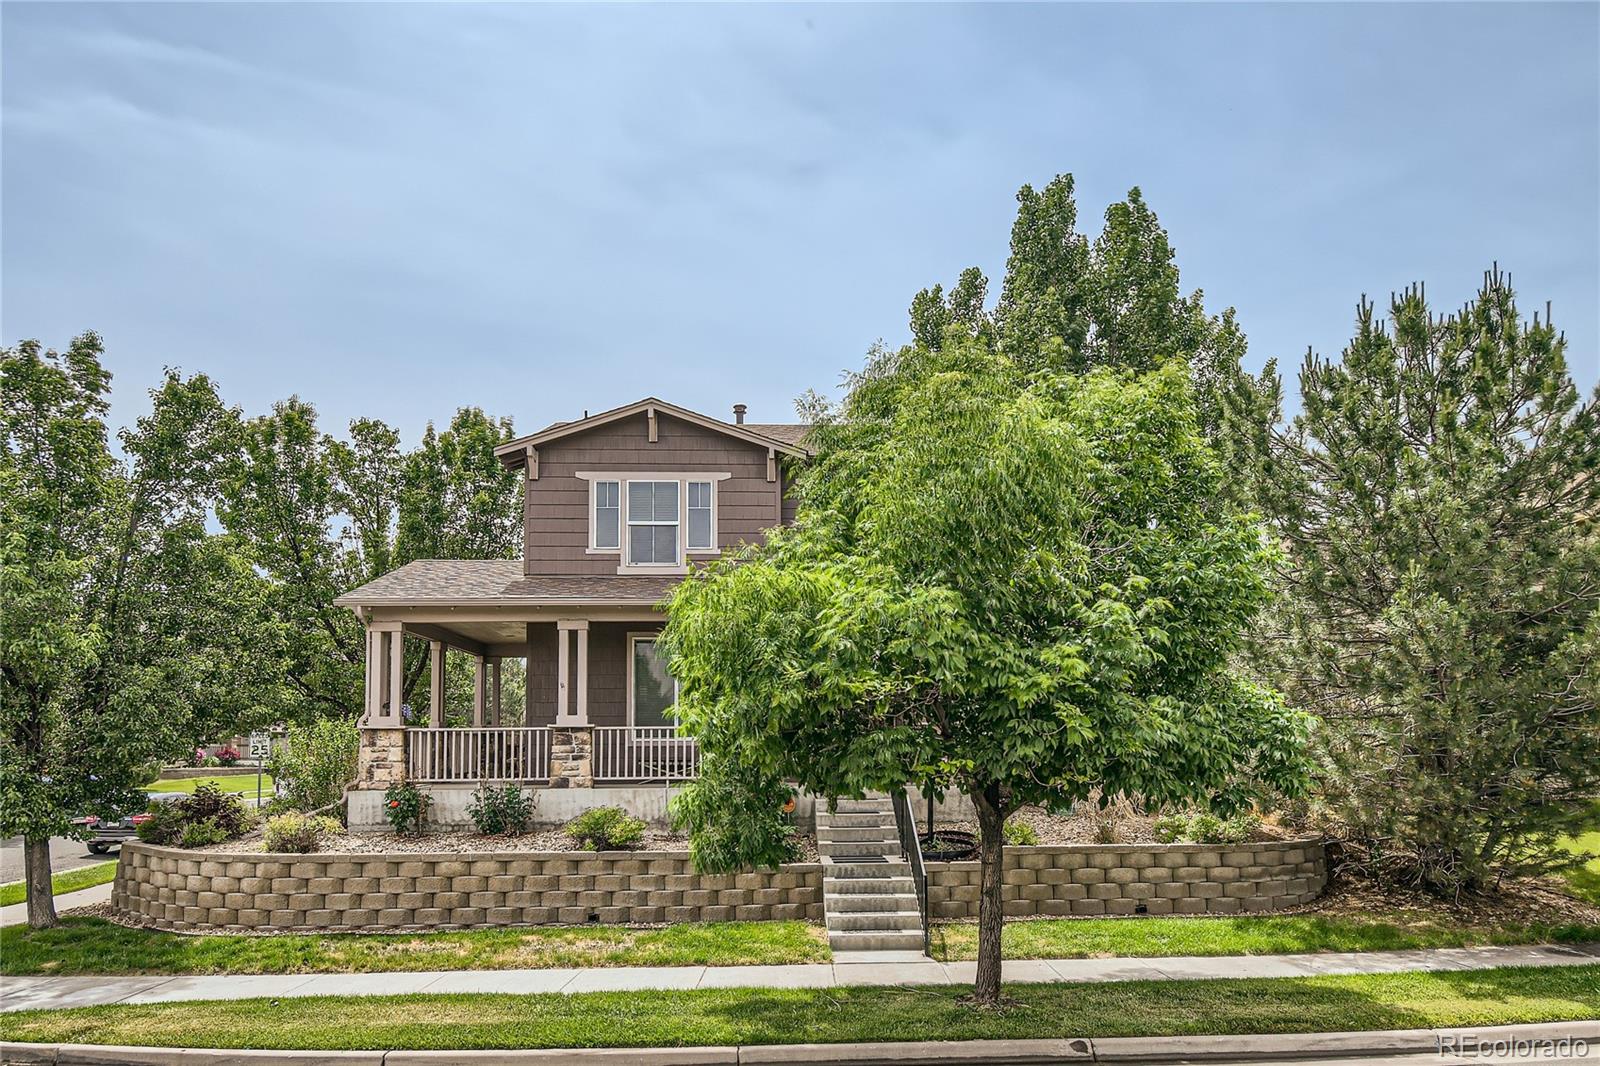 10596  Unity Parkway, commerce city MLS: 8553847 Beds: 3 Baths: 3 Price: $565,000